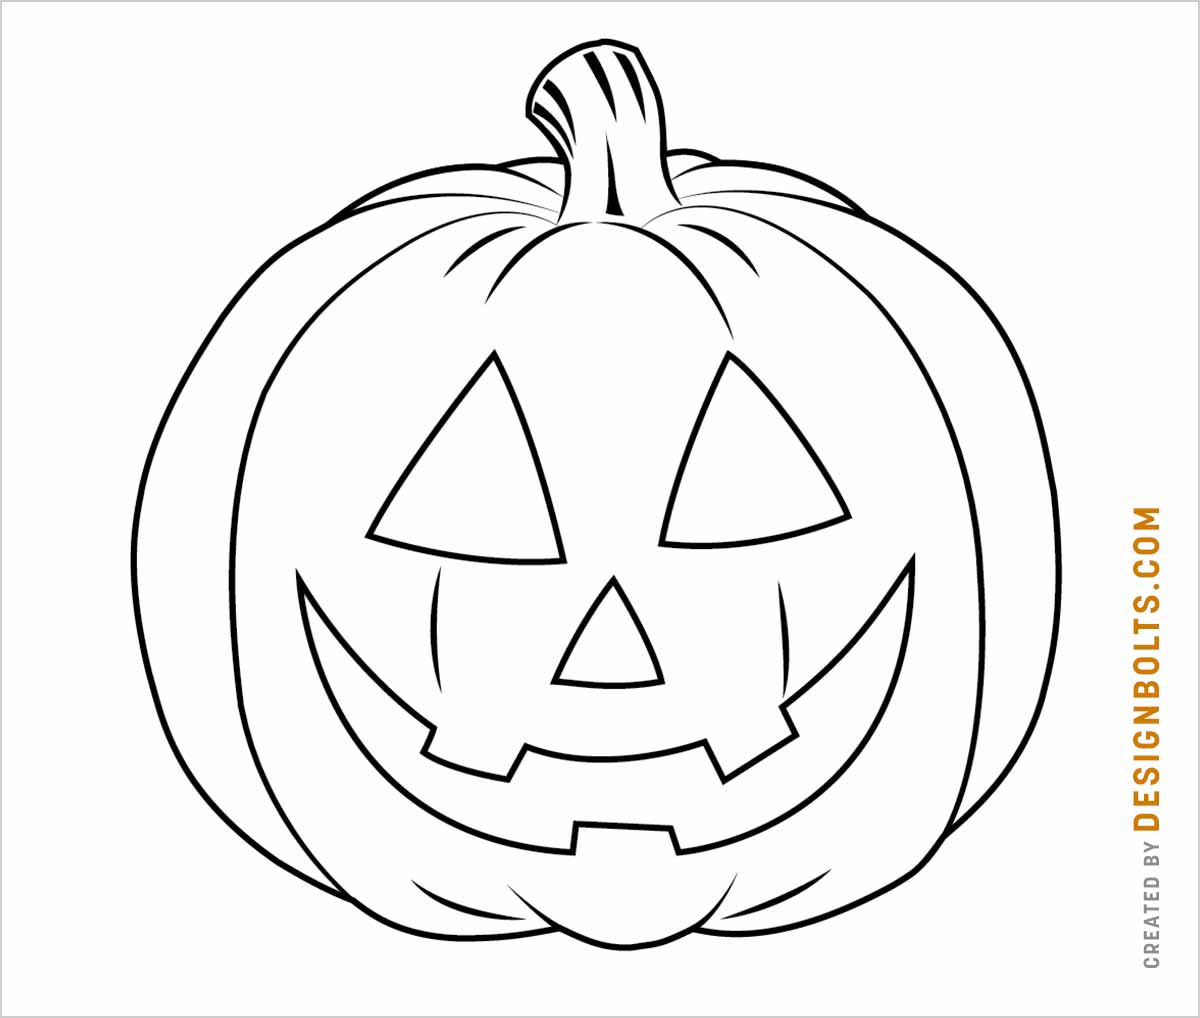 25 Easy Pumpkin Drawing Ideas - How To Draw A Pumpkin - Blitsy